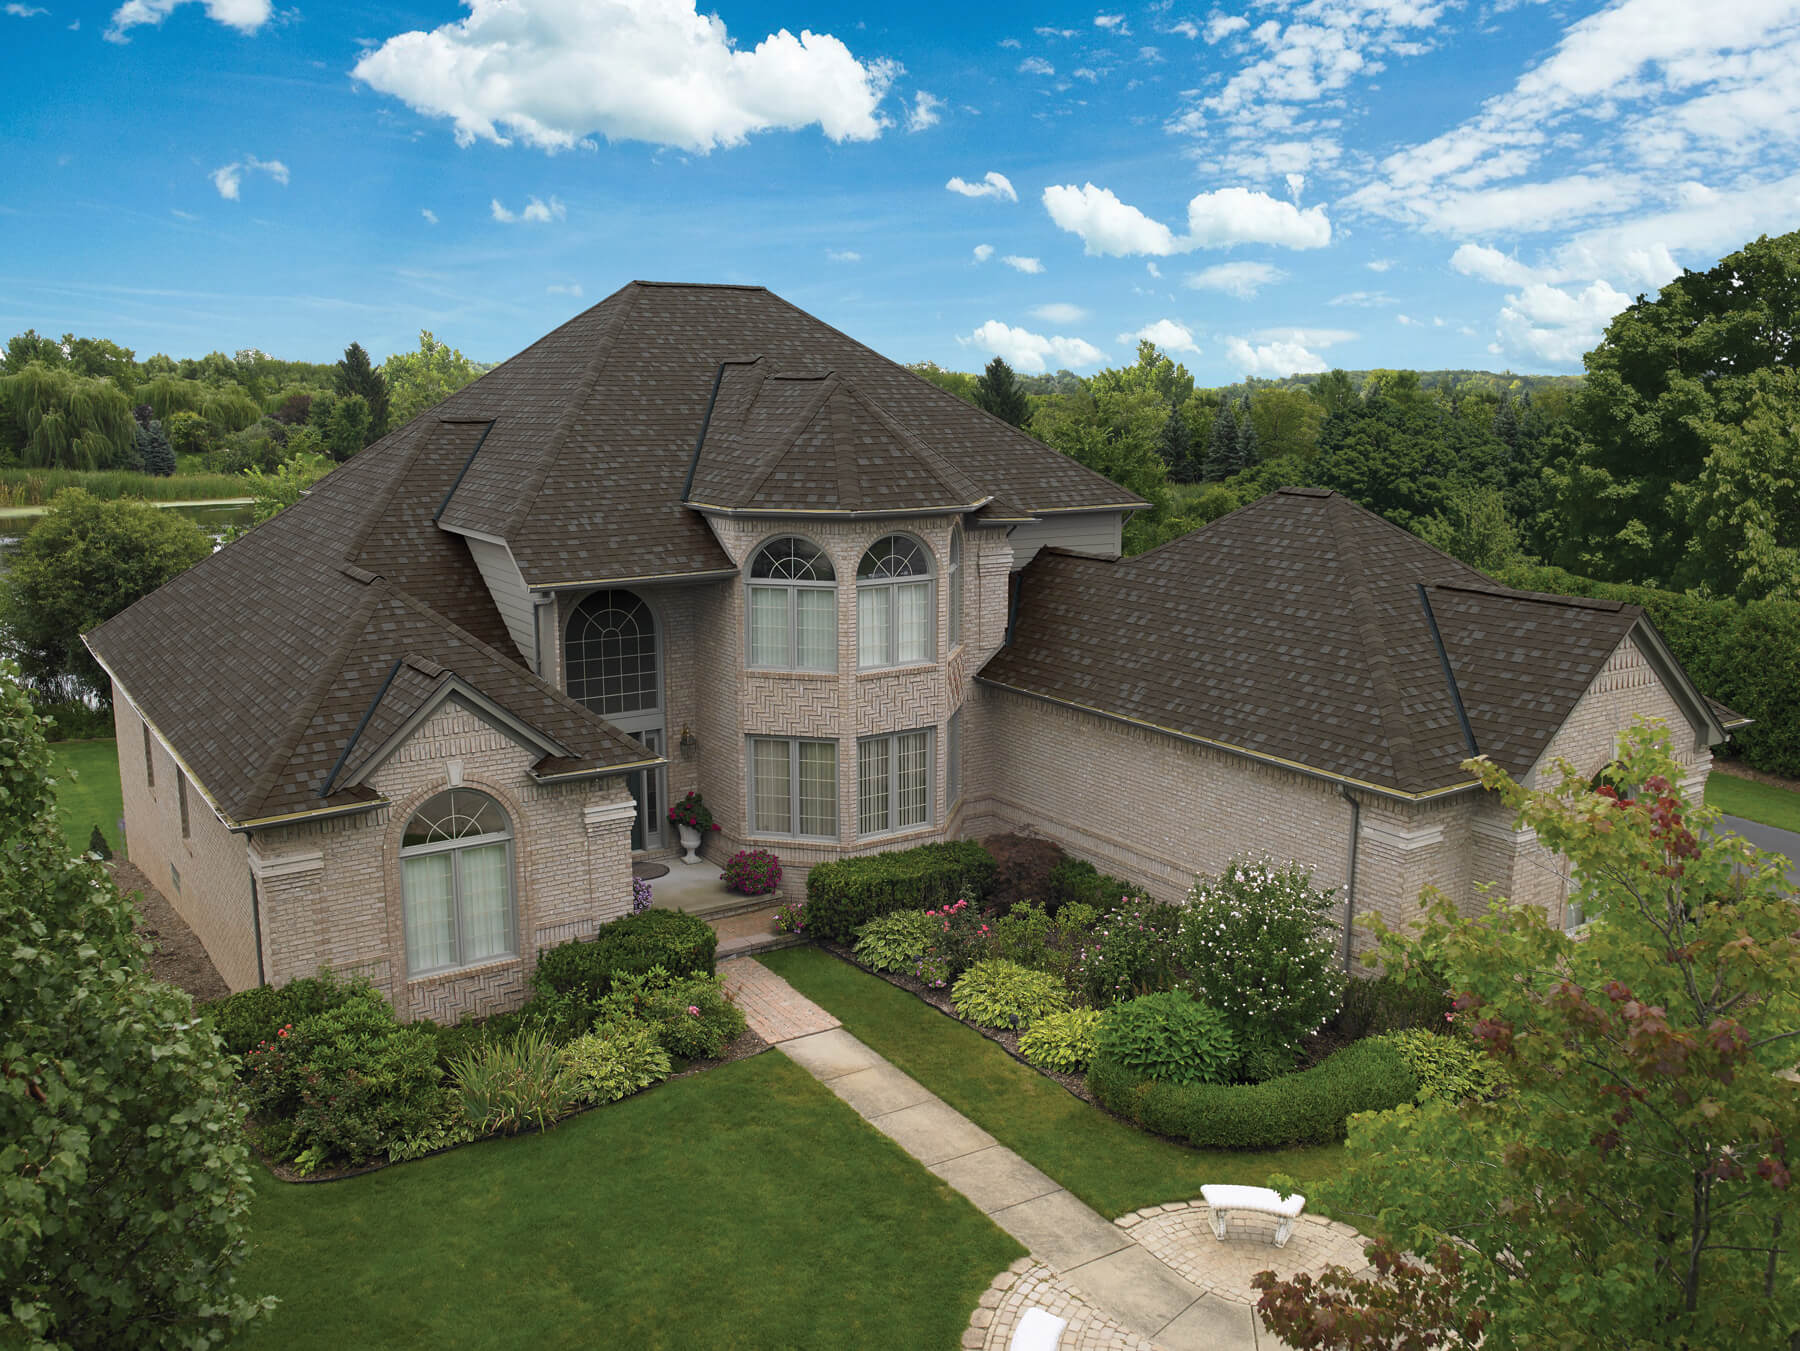 5 Amazing Little-Known Facts About IKO Dynasty® Roofing Shingles